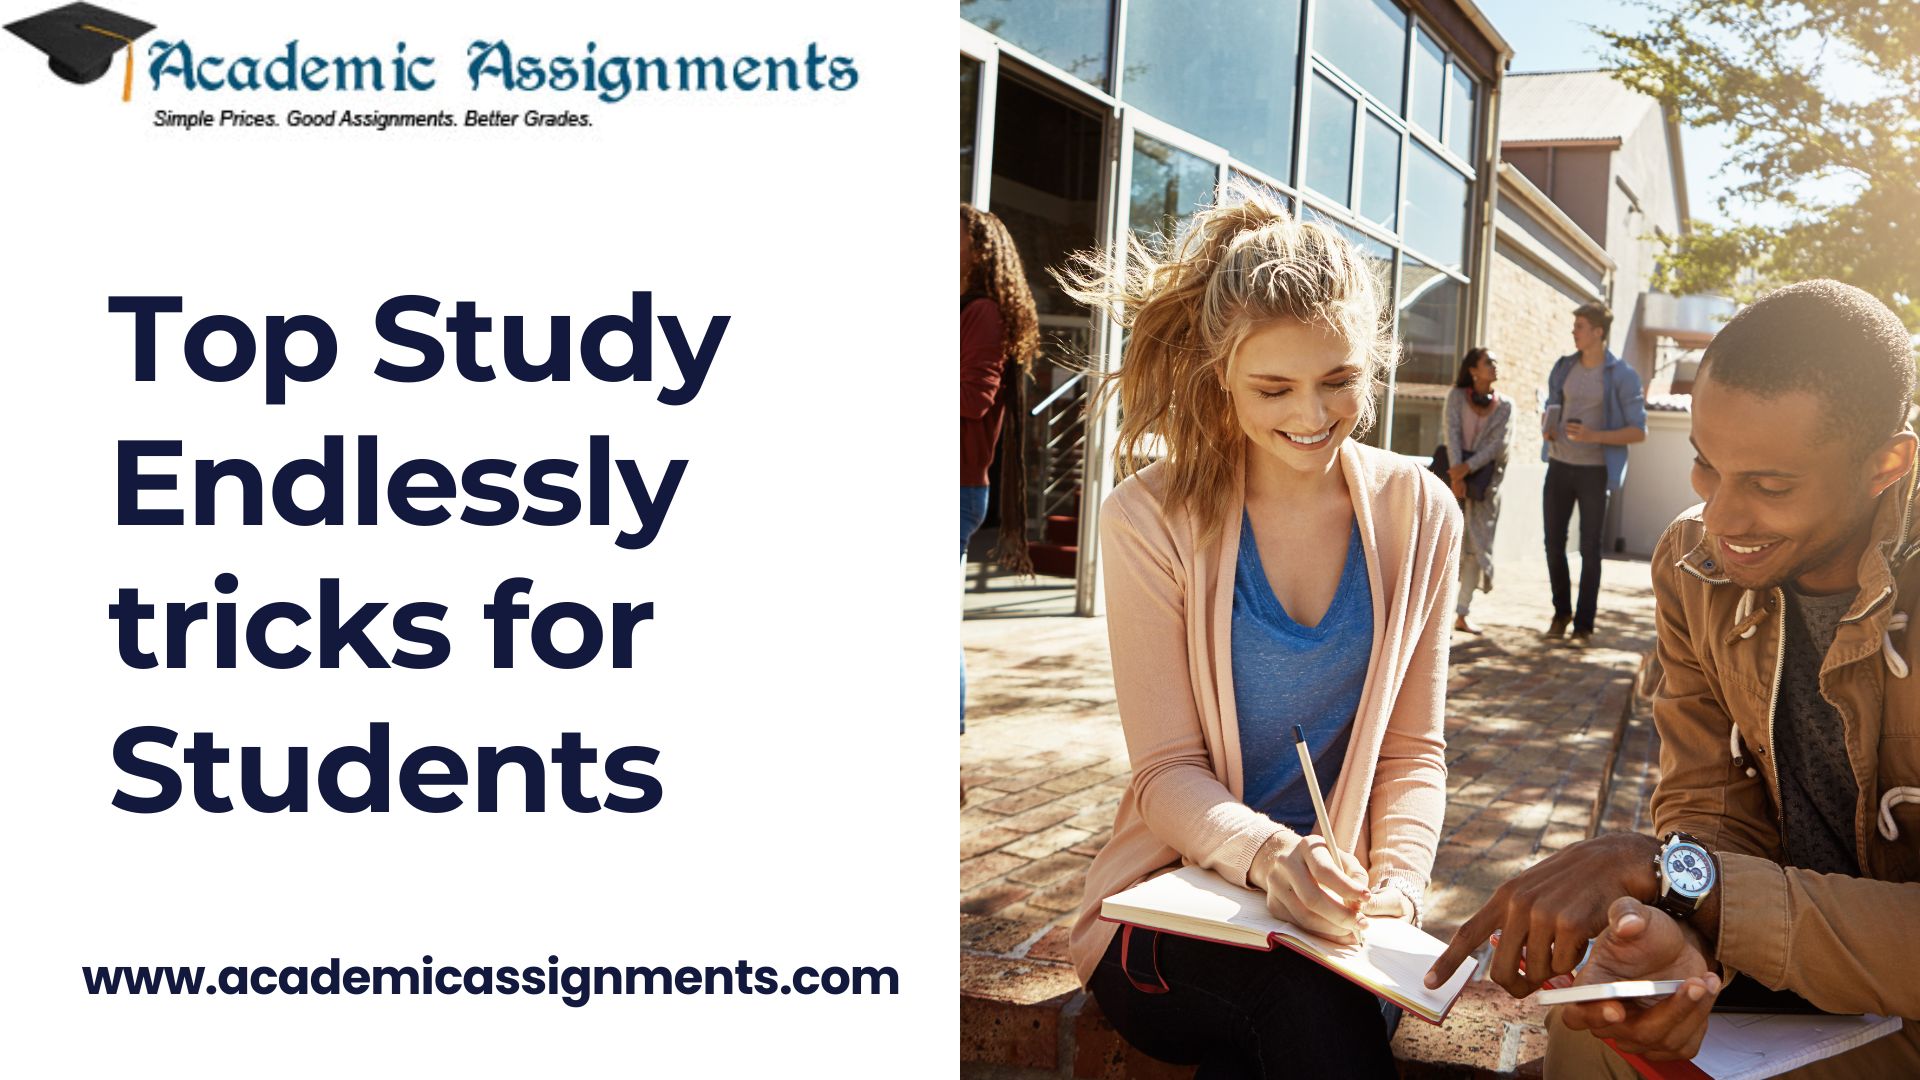 Top Study Endlessly tricks for Students